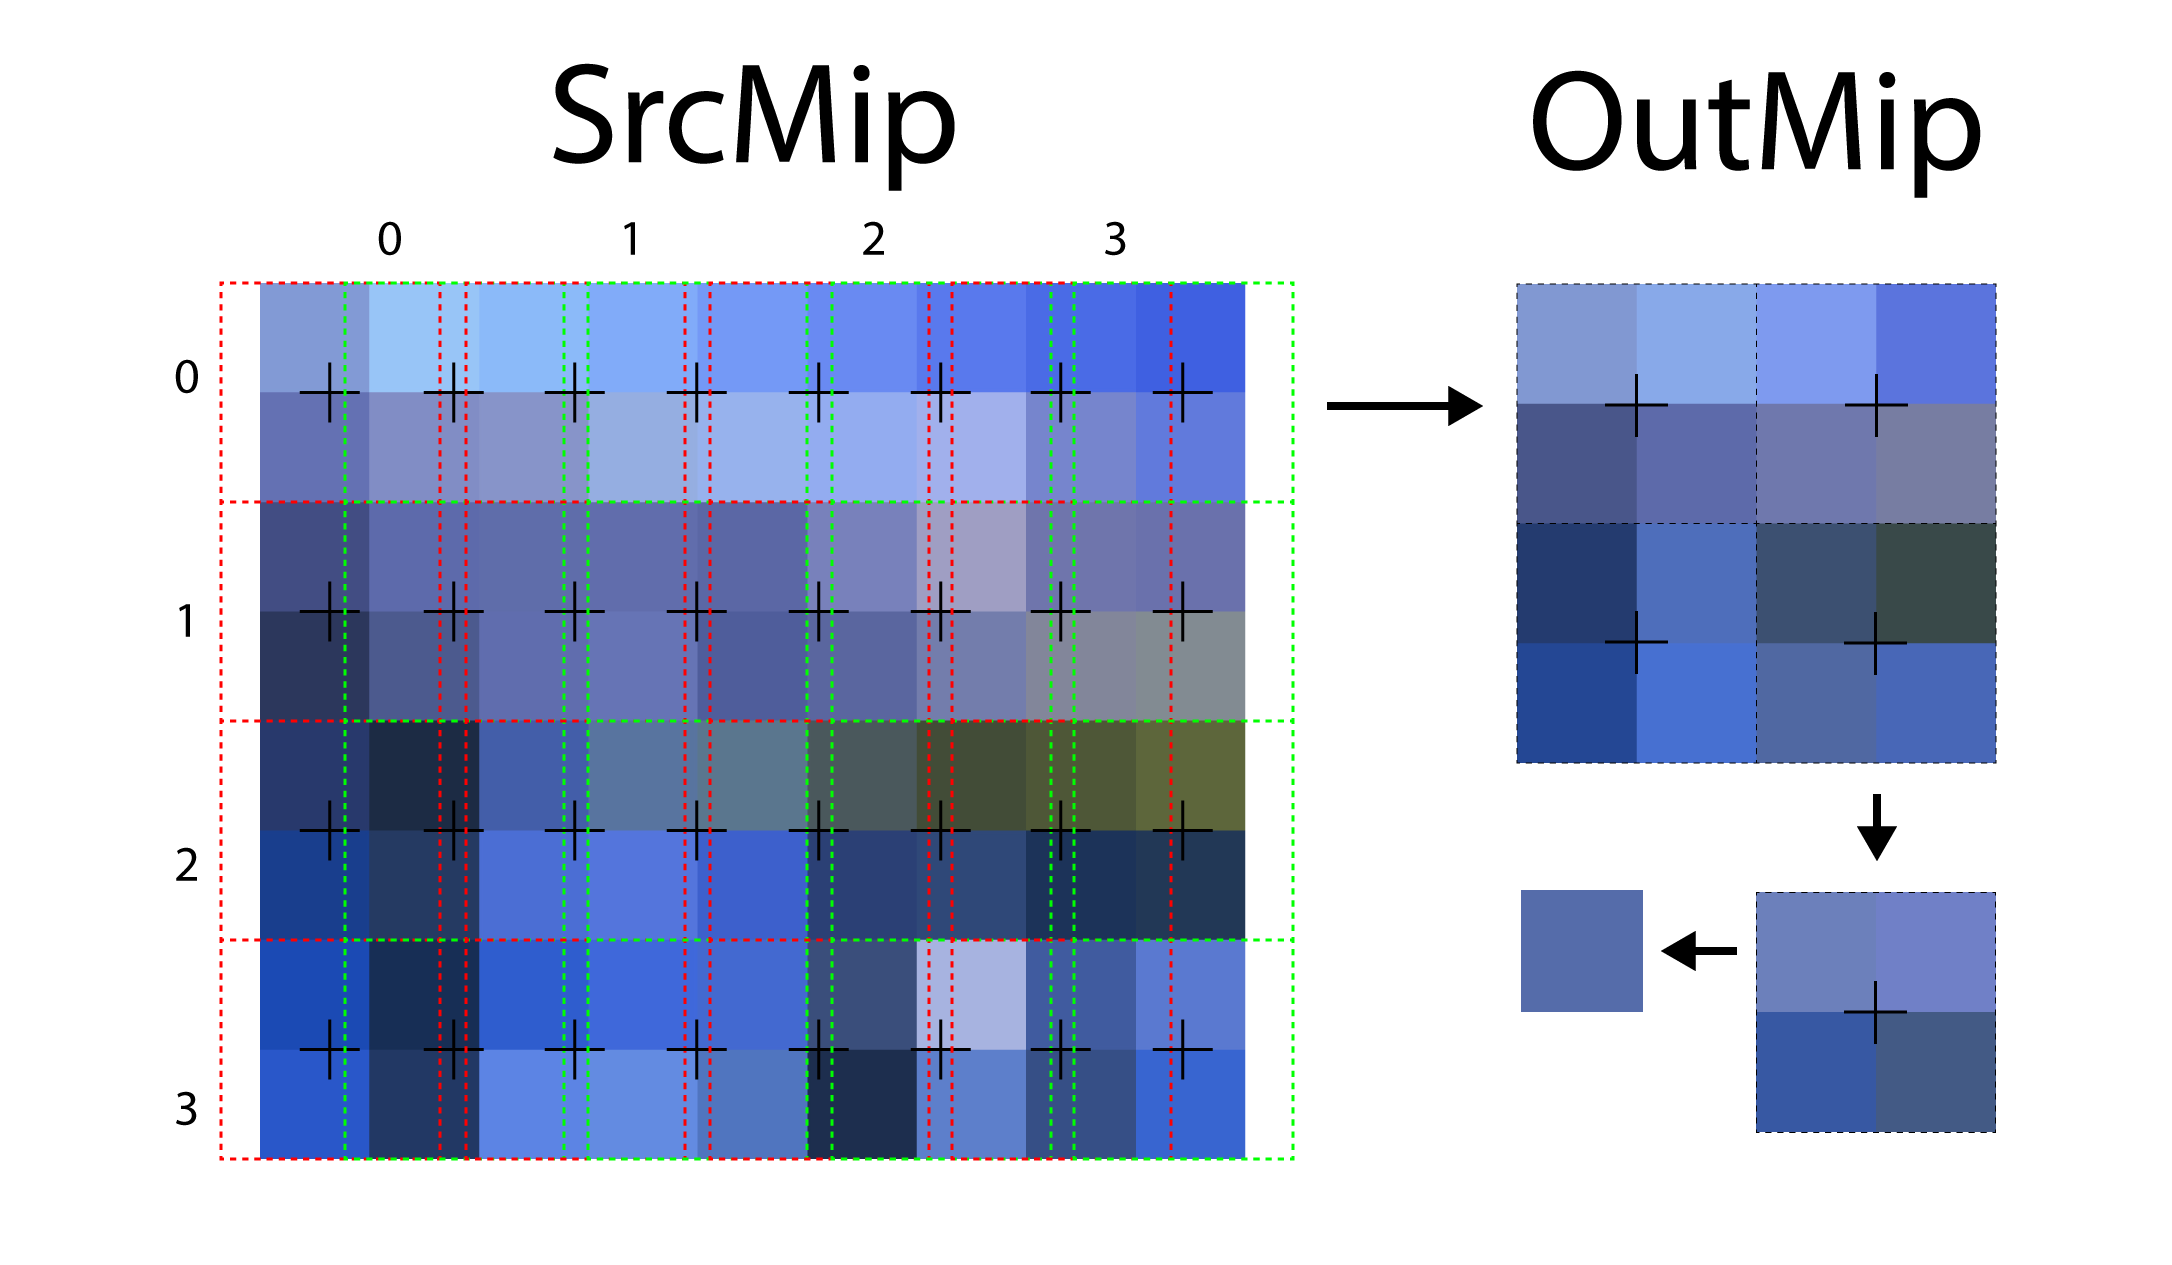 When mipmapping a texture with an odd width, multiple samples are taken in the U texture coordinate axis and blended together to produce the final color.